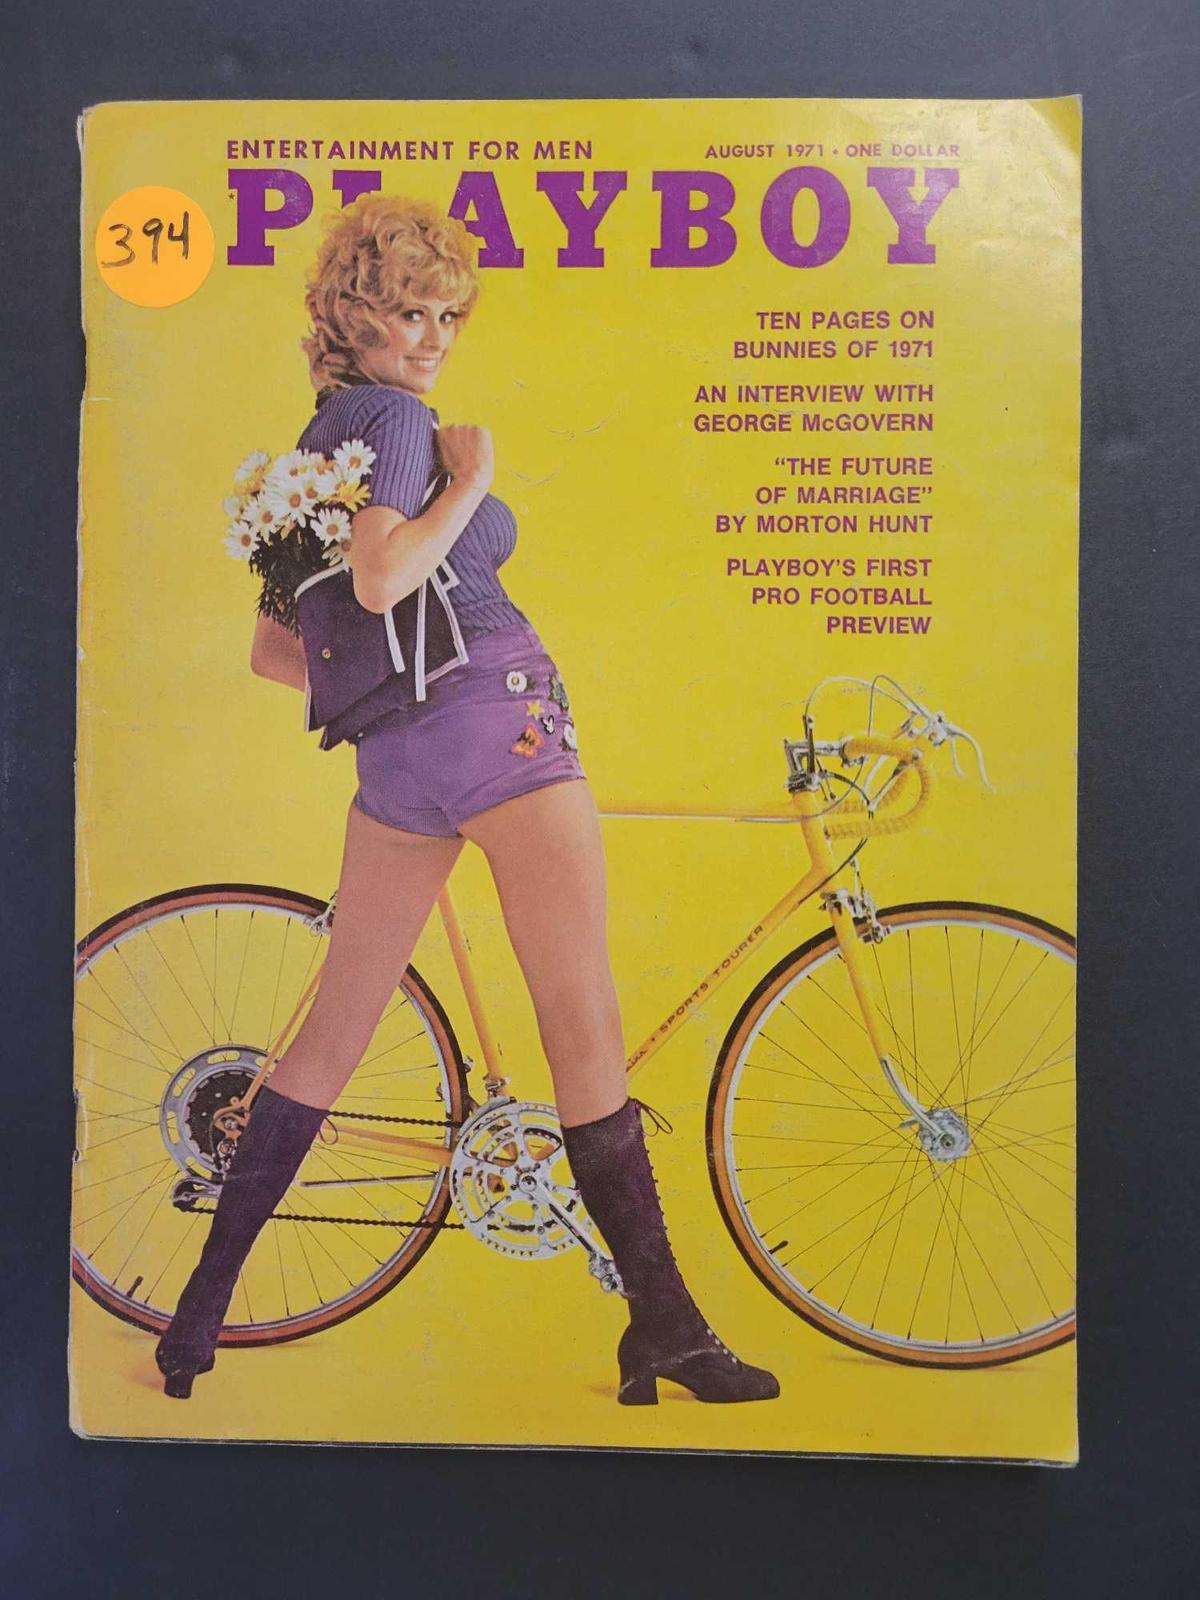 ADULTS ONLY! Vintage Playboy Aug 1971 $1 STS